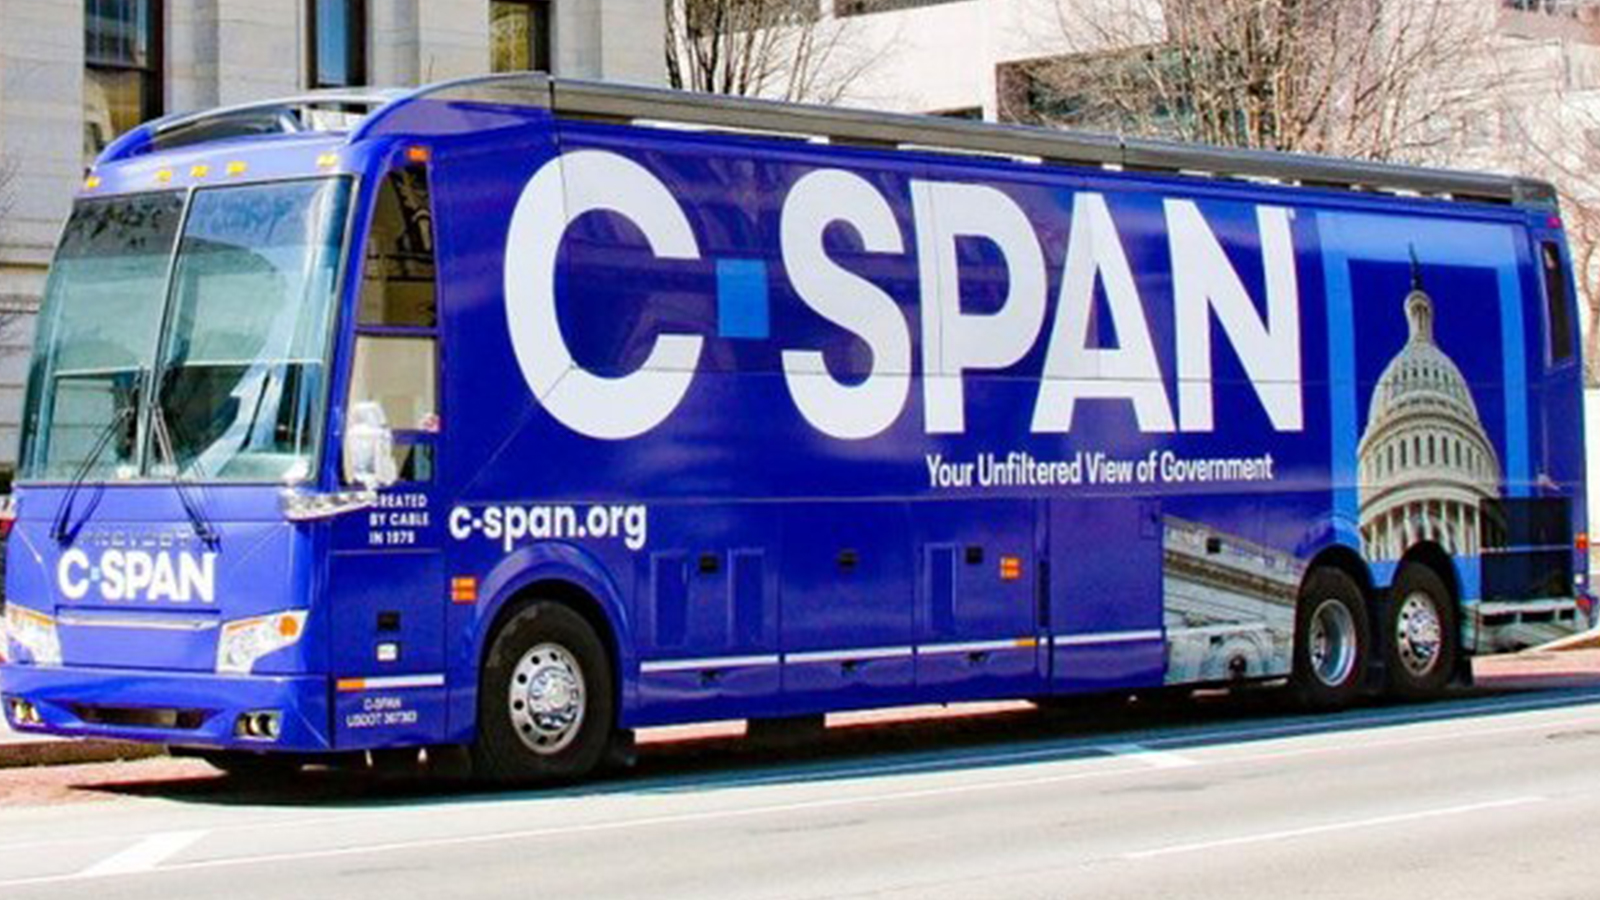 The C-SPAN promotional bus.